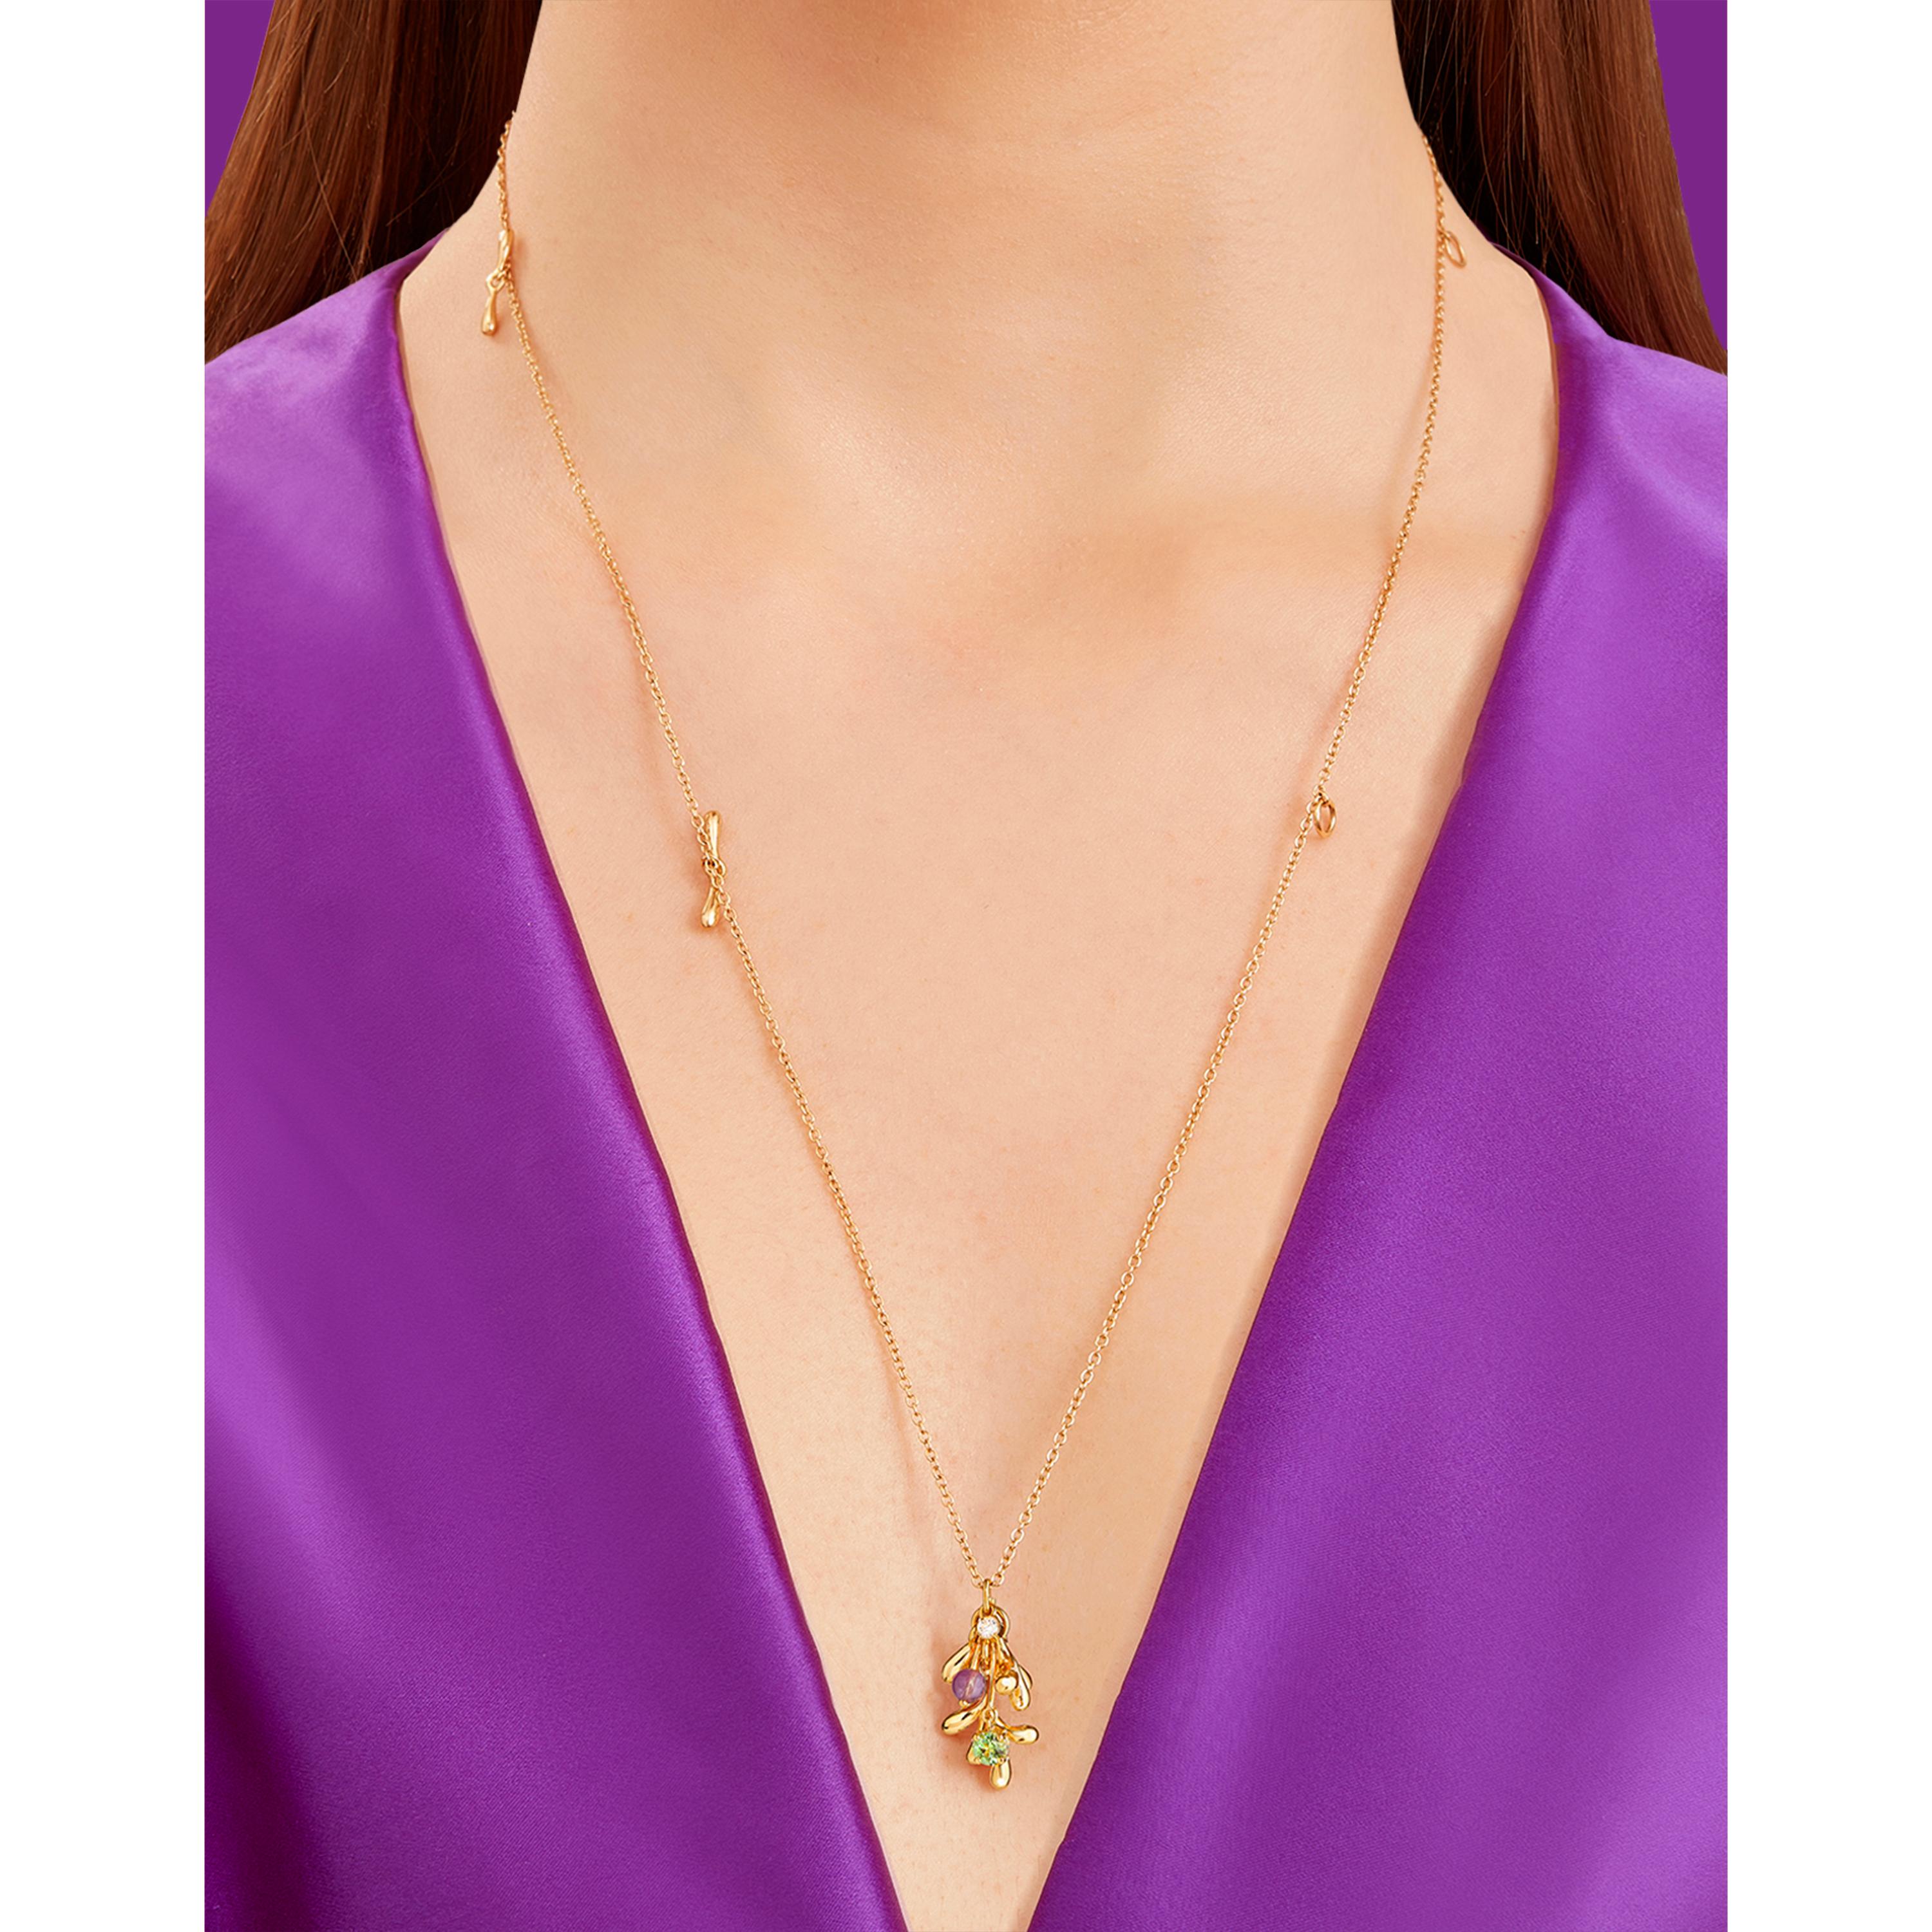 Springing forth from a lush magical wilderness is the JungleRemix Small Pendant Necklace with its clusters of gold leaves with well-rounded tips jingling and jangling to mimic the swaying movements of exotic flora in the heart of the rainforest.